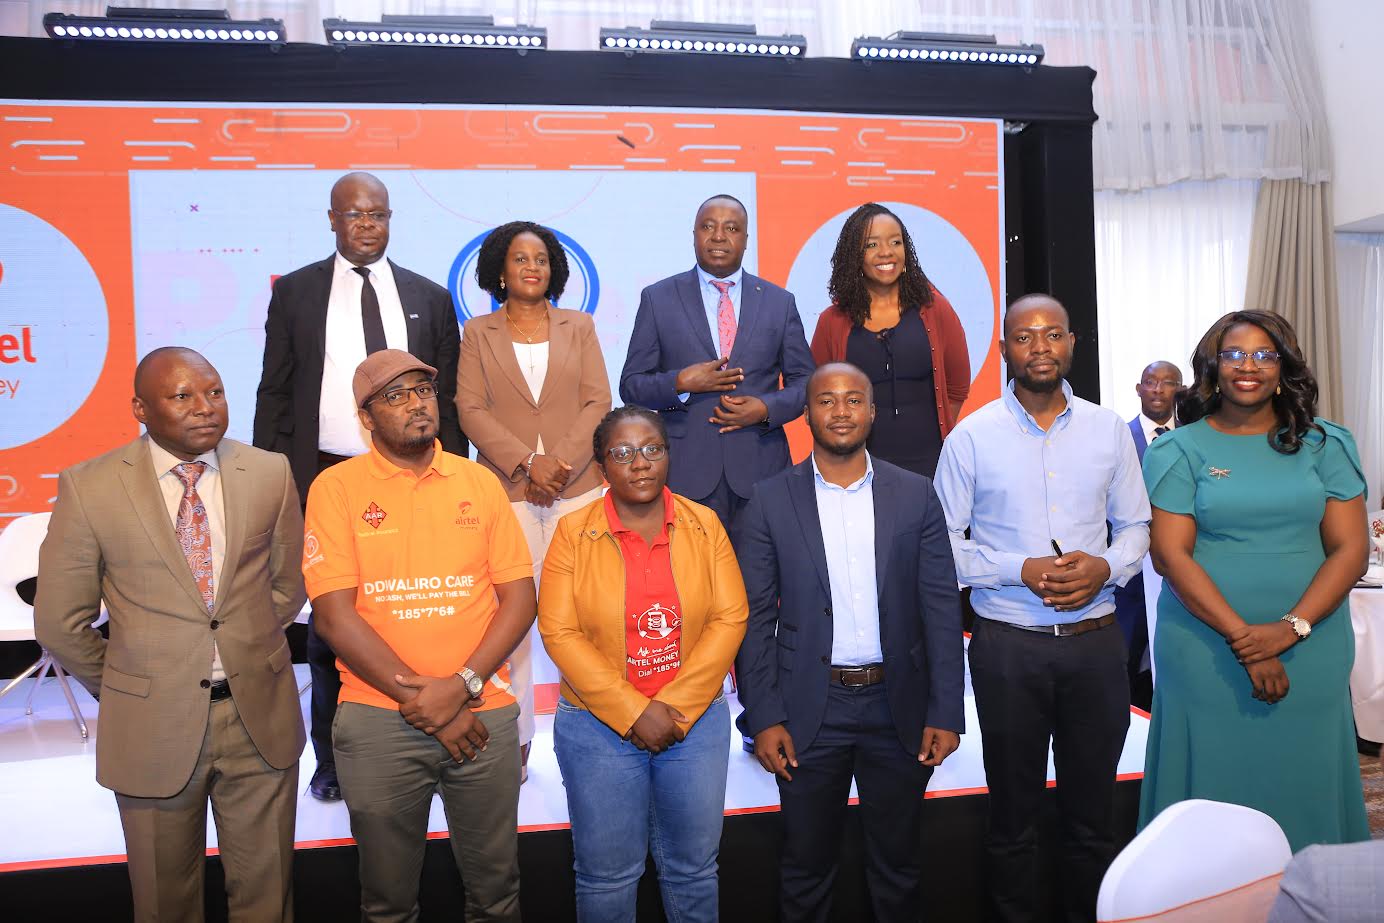 Customers to pay shs10,000 premium as Airtel, AAR launch low-cost life insurance product